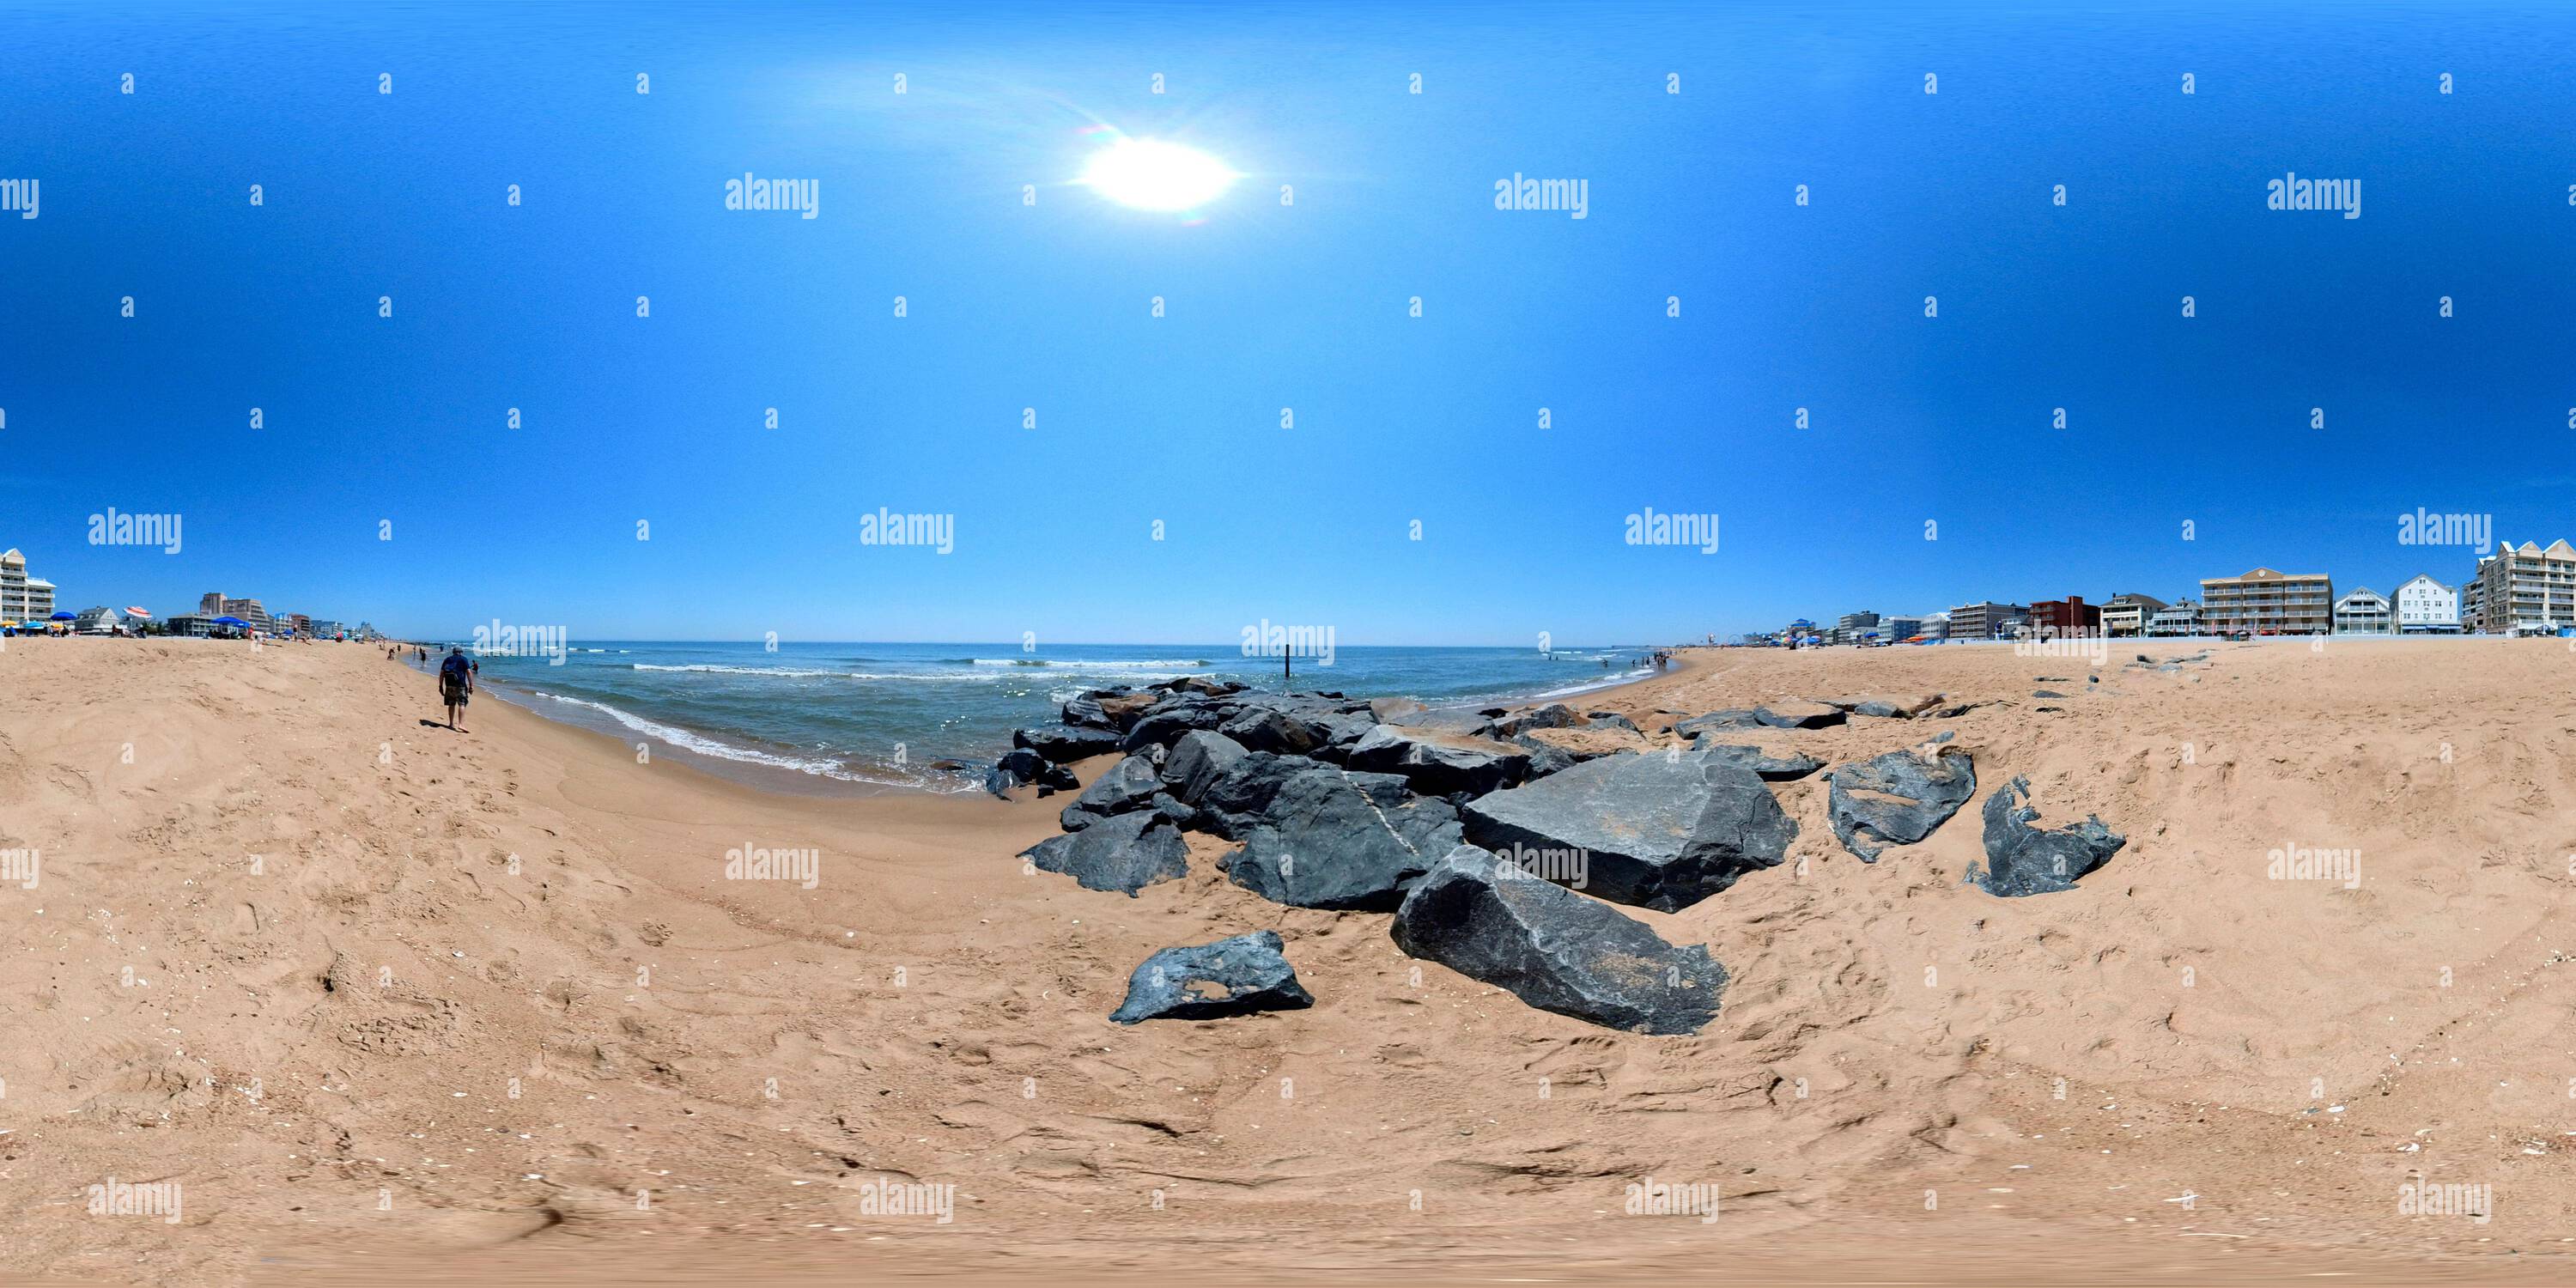 360 degree panoramic view of On the beach in Ocean City, Maryland near 5th Street